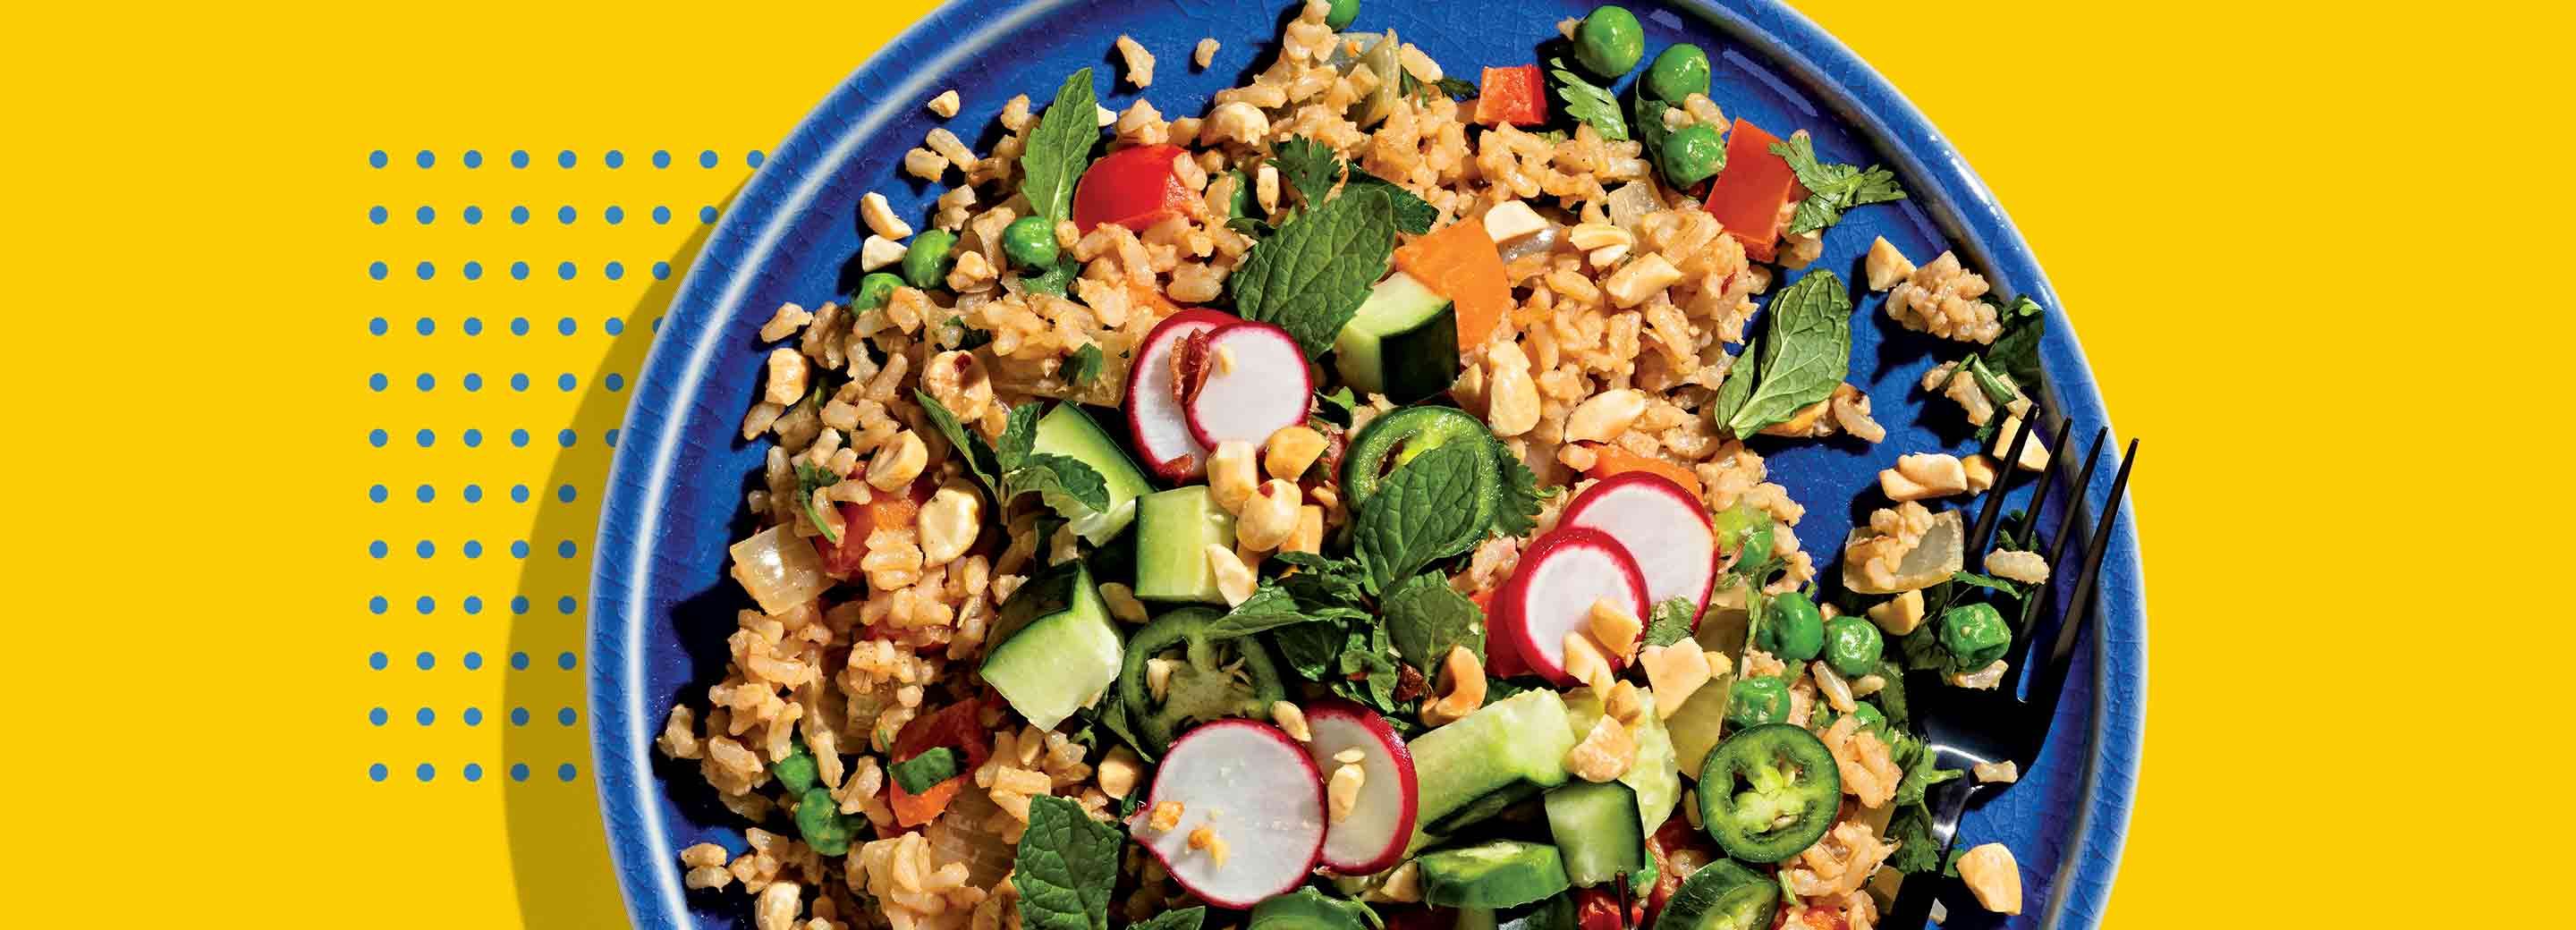 Peanut Fried Rice with Quick-Pickled Veggies